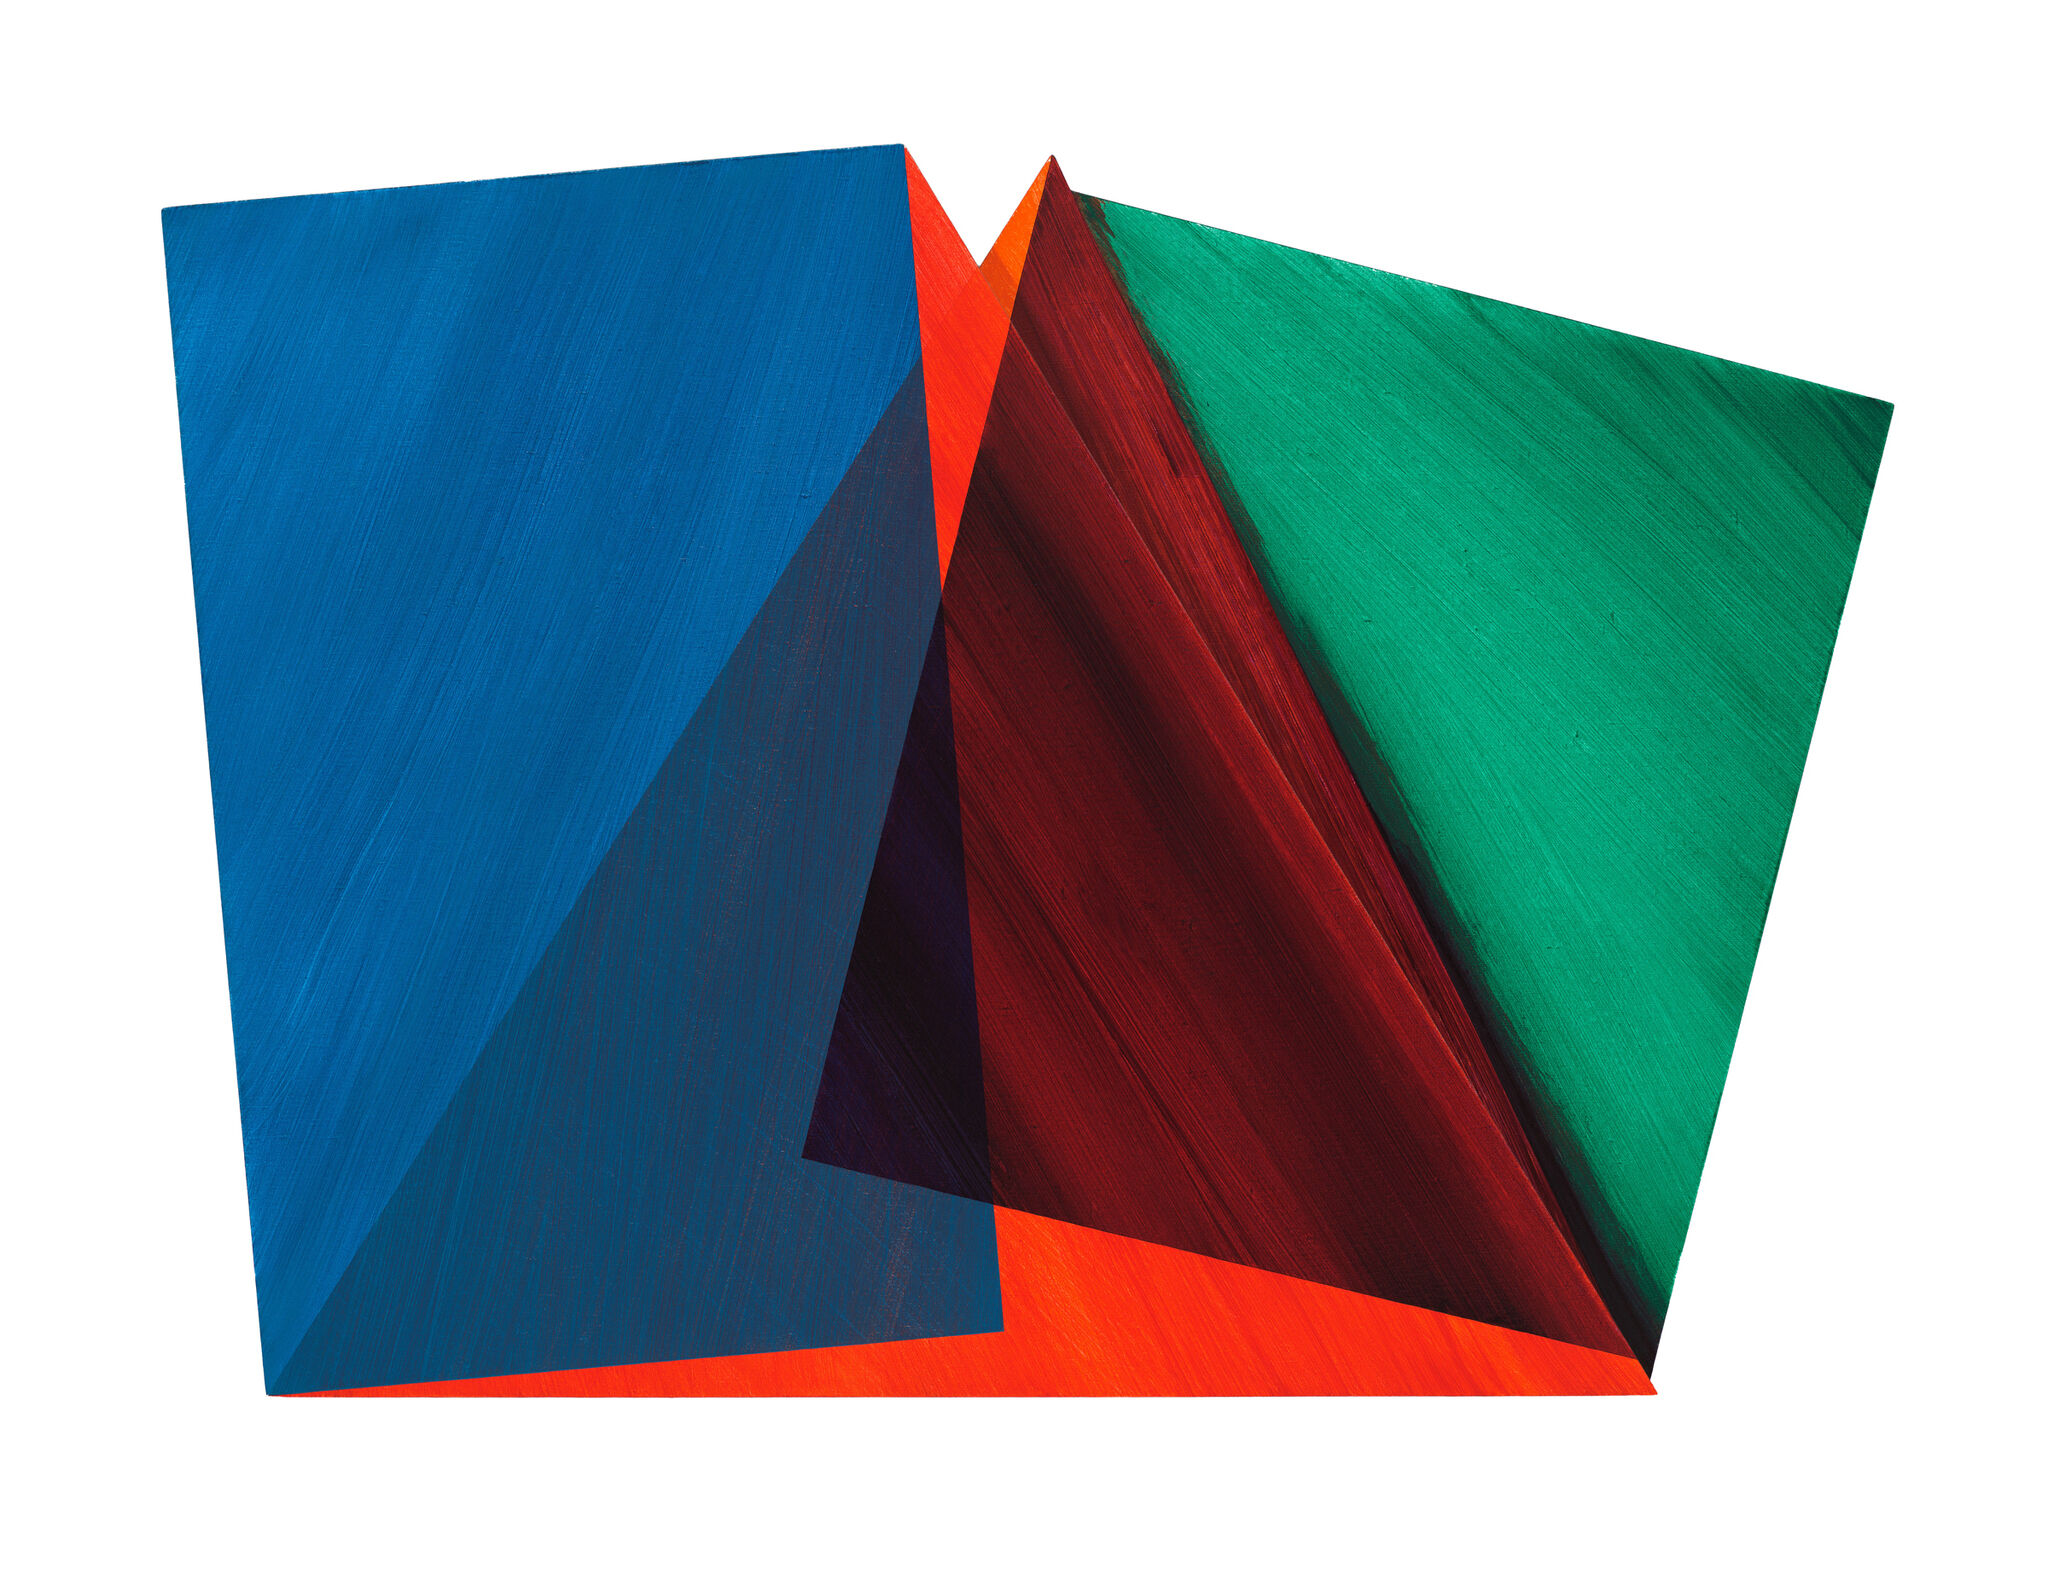 A blue vertical rectangle tilting to the left overlaps with a green rectangle tilting to the right. Layered with the two rectangles are orange and red triangles.